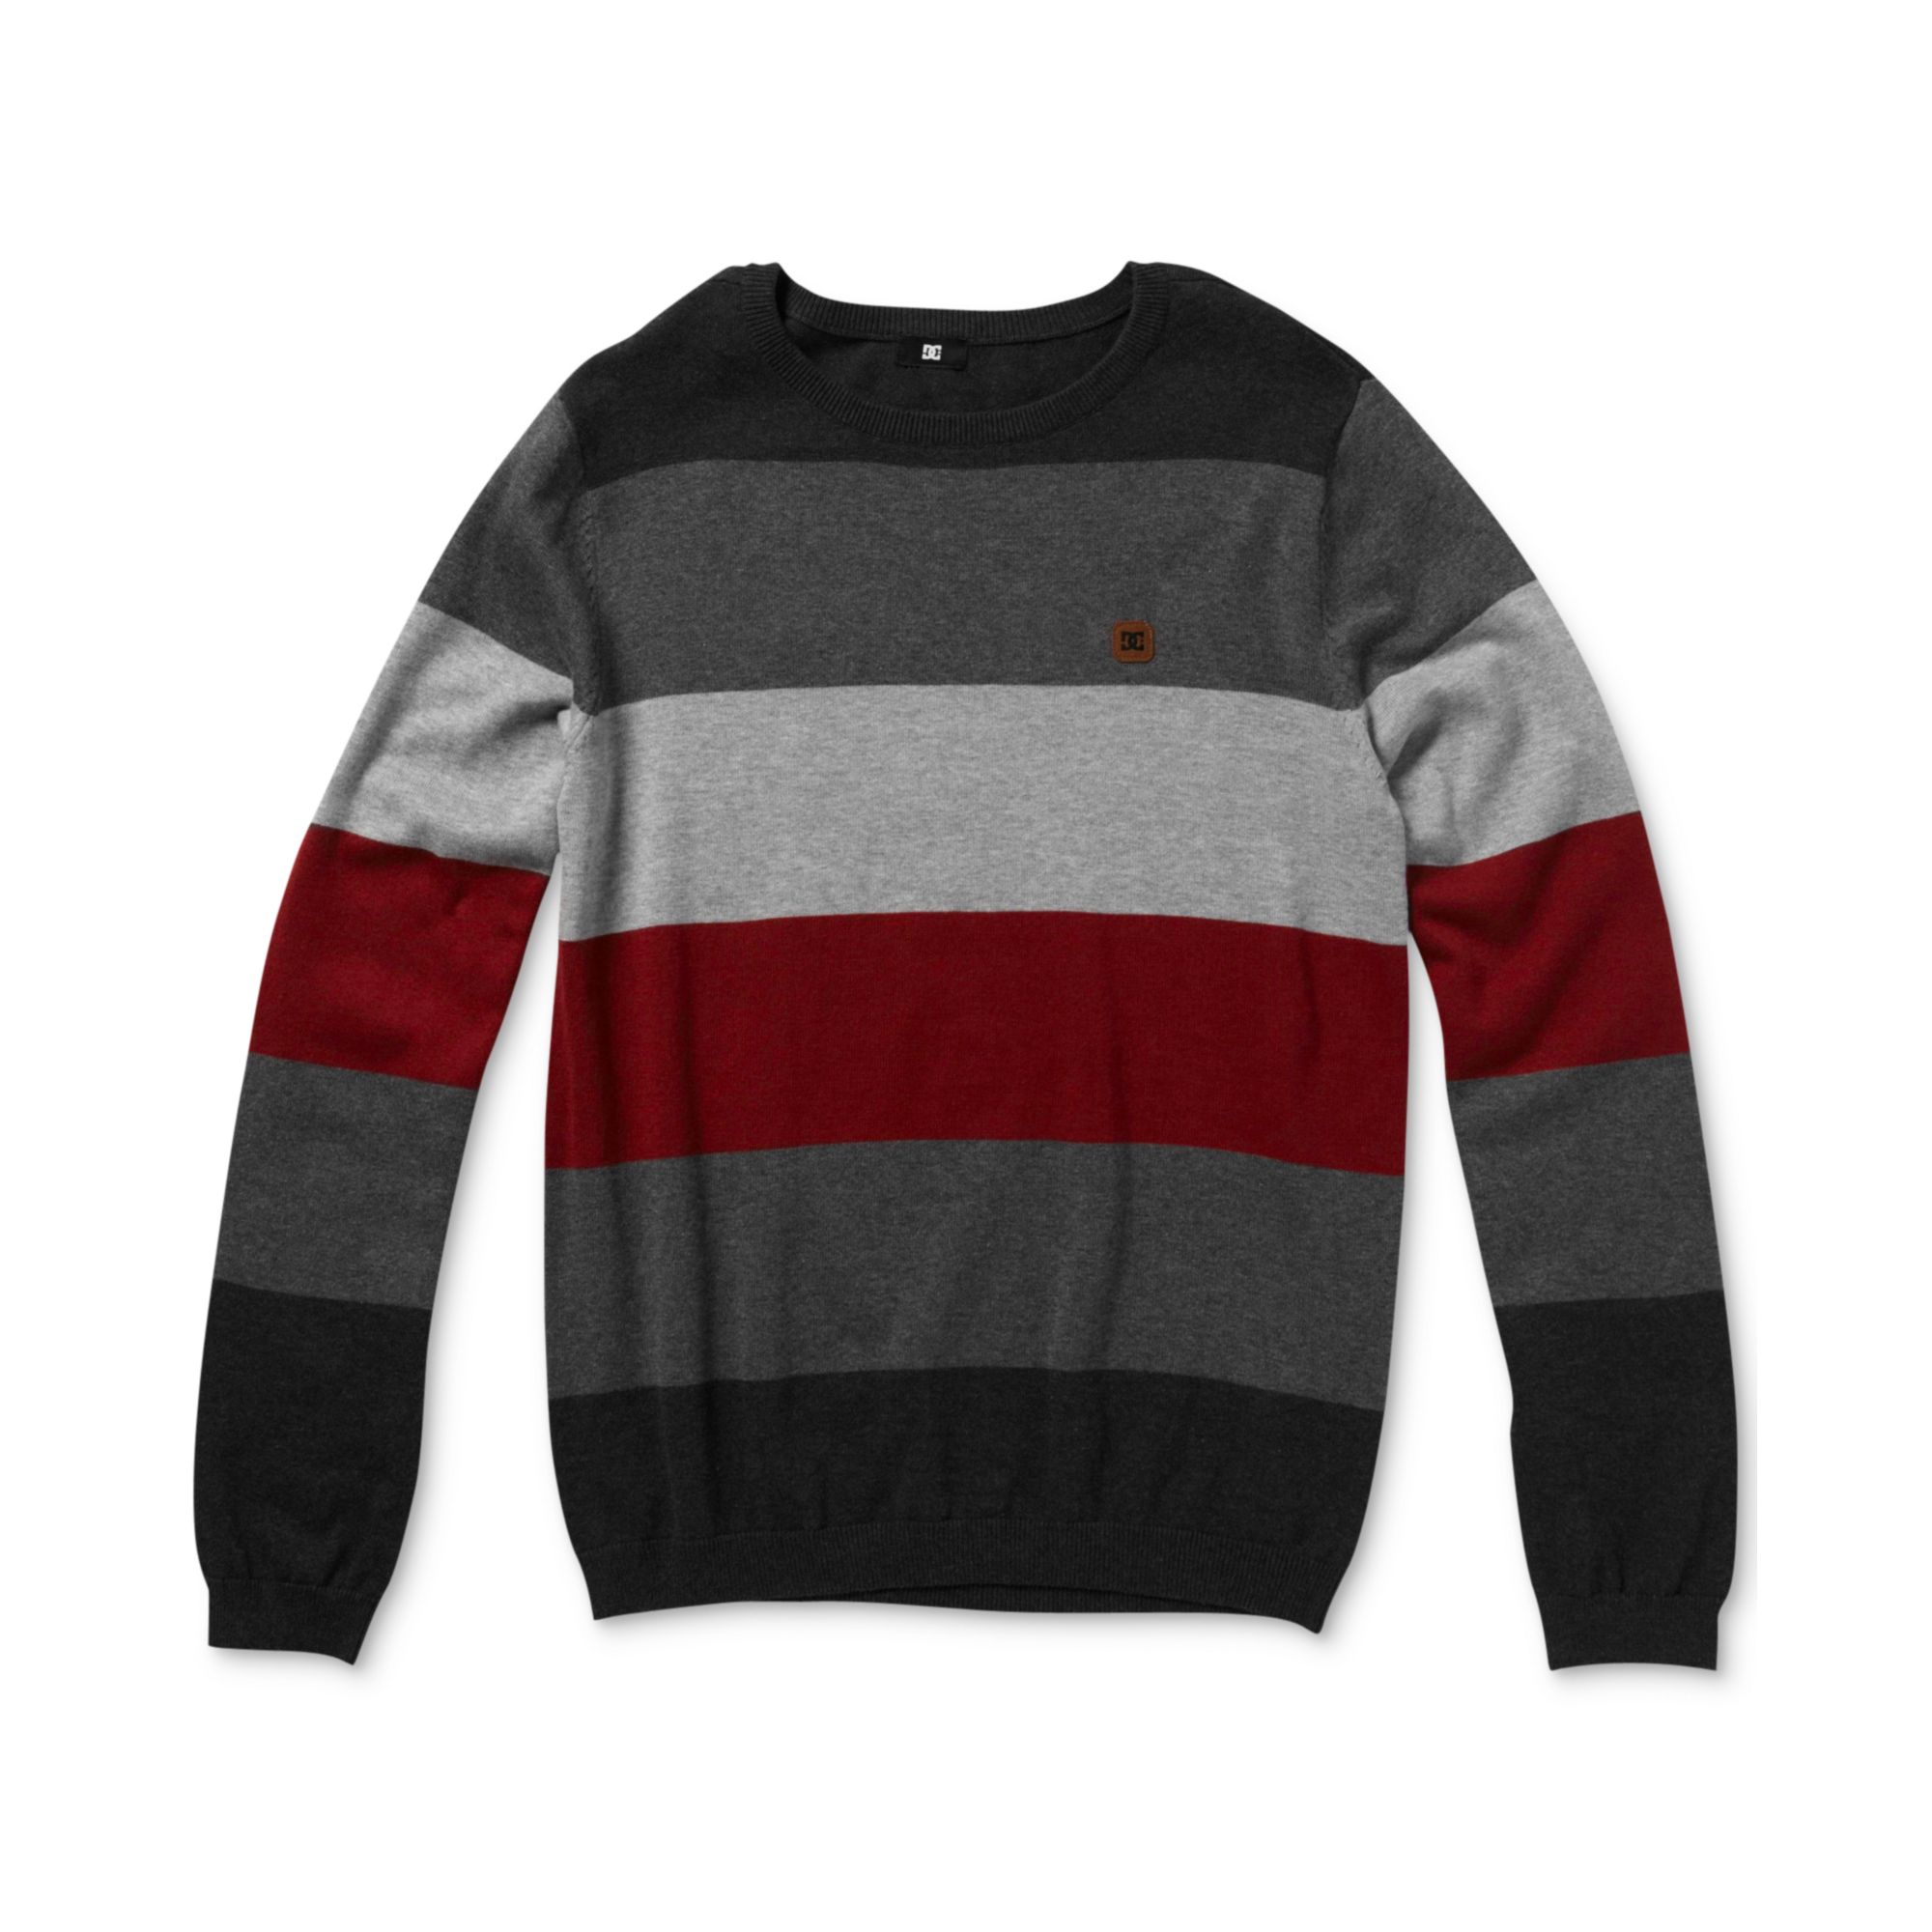 Dc Shoes Bob Sweater in Multicolor for Men (Heather Grey